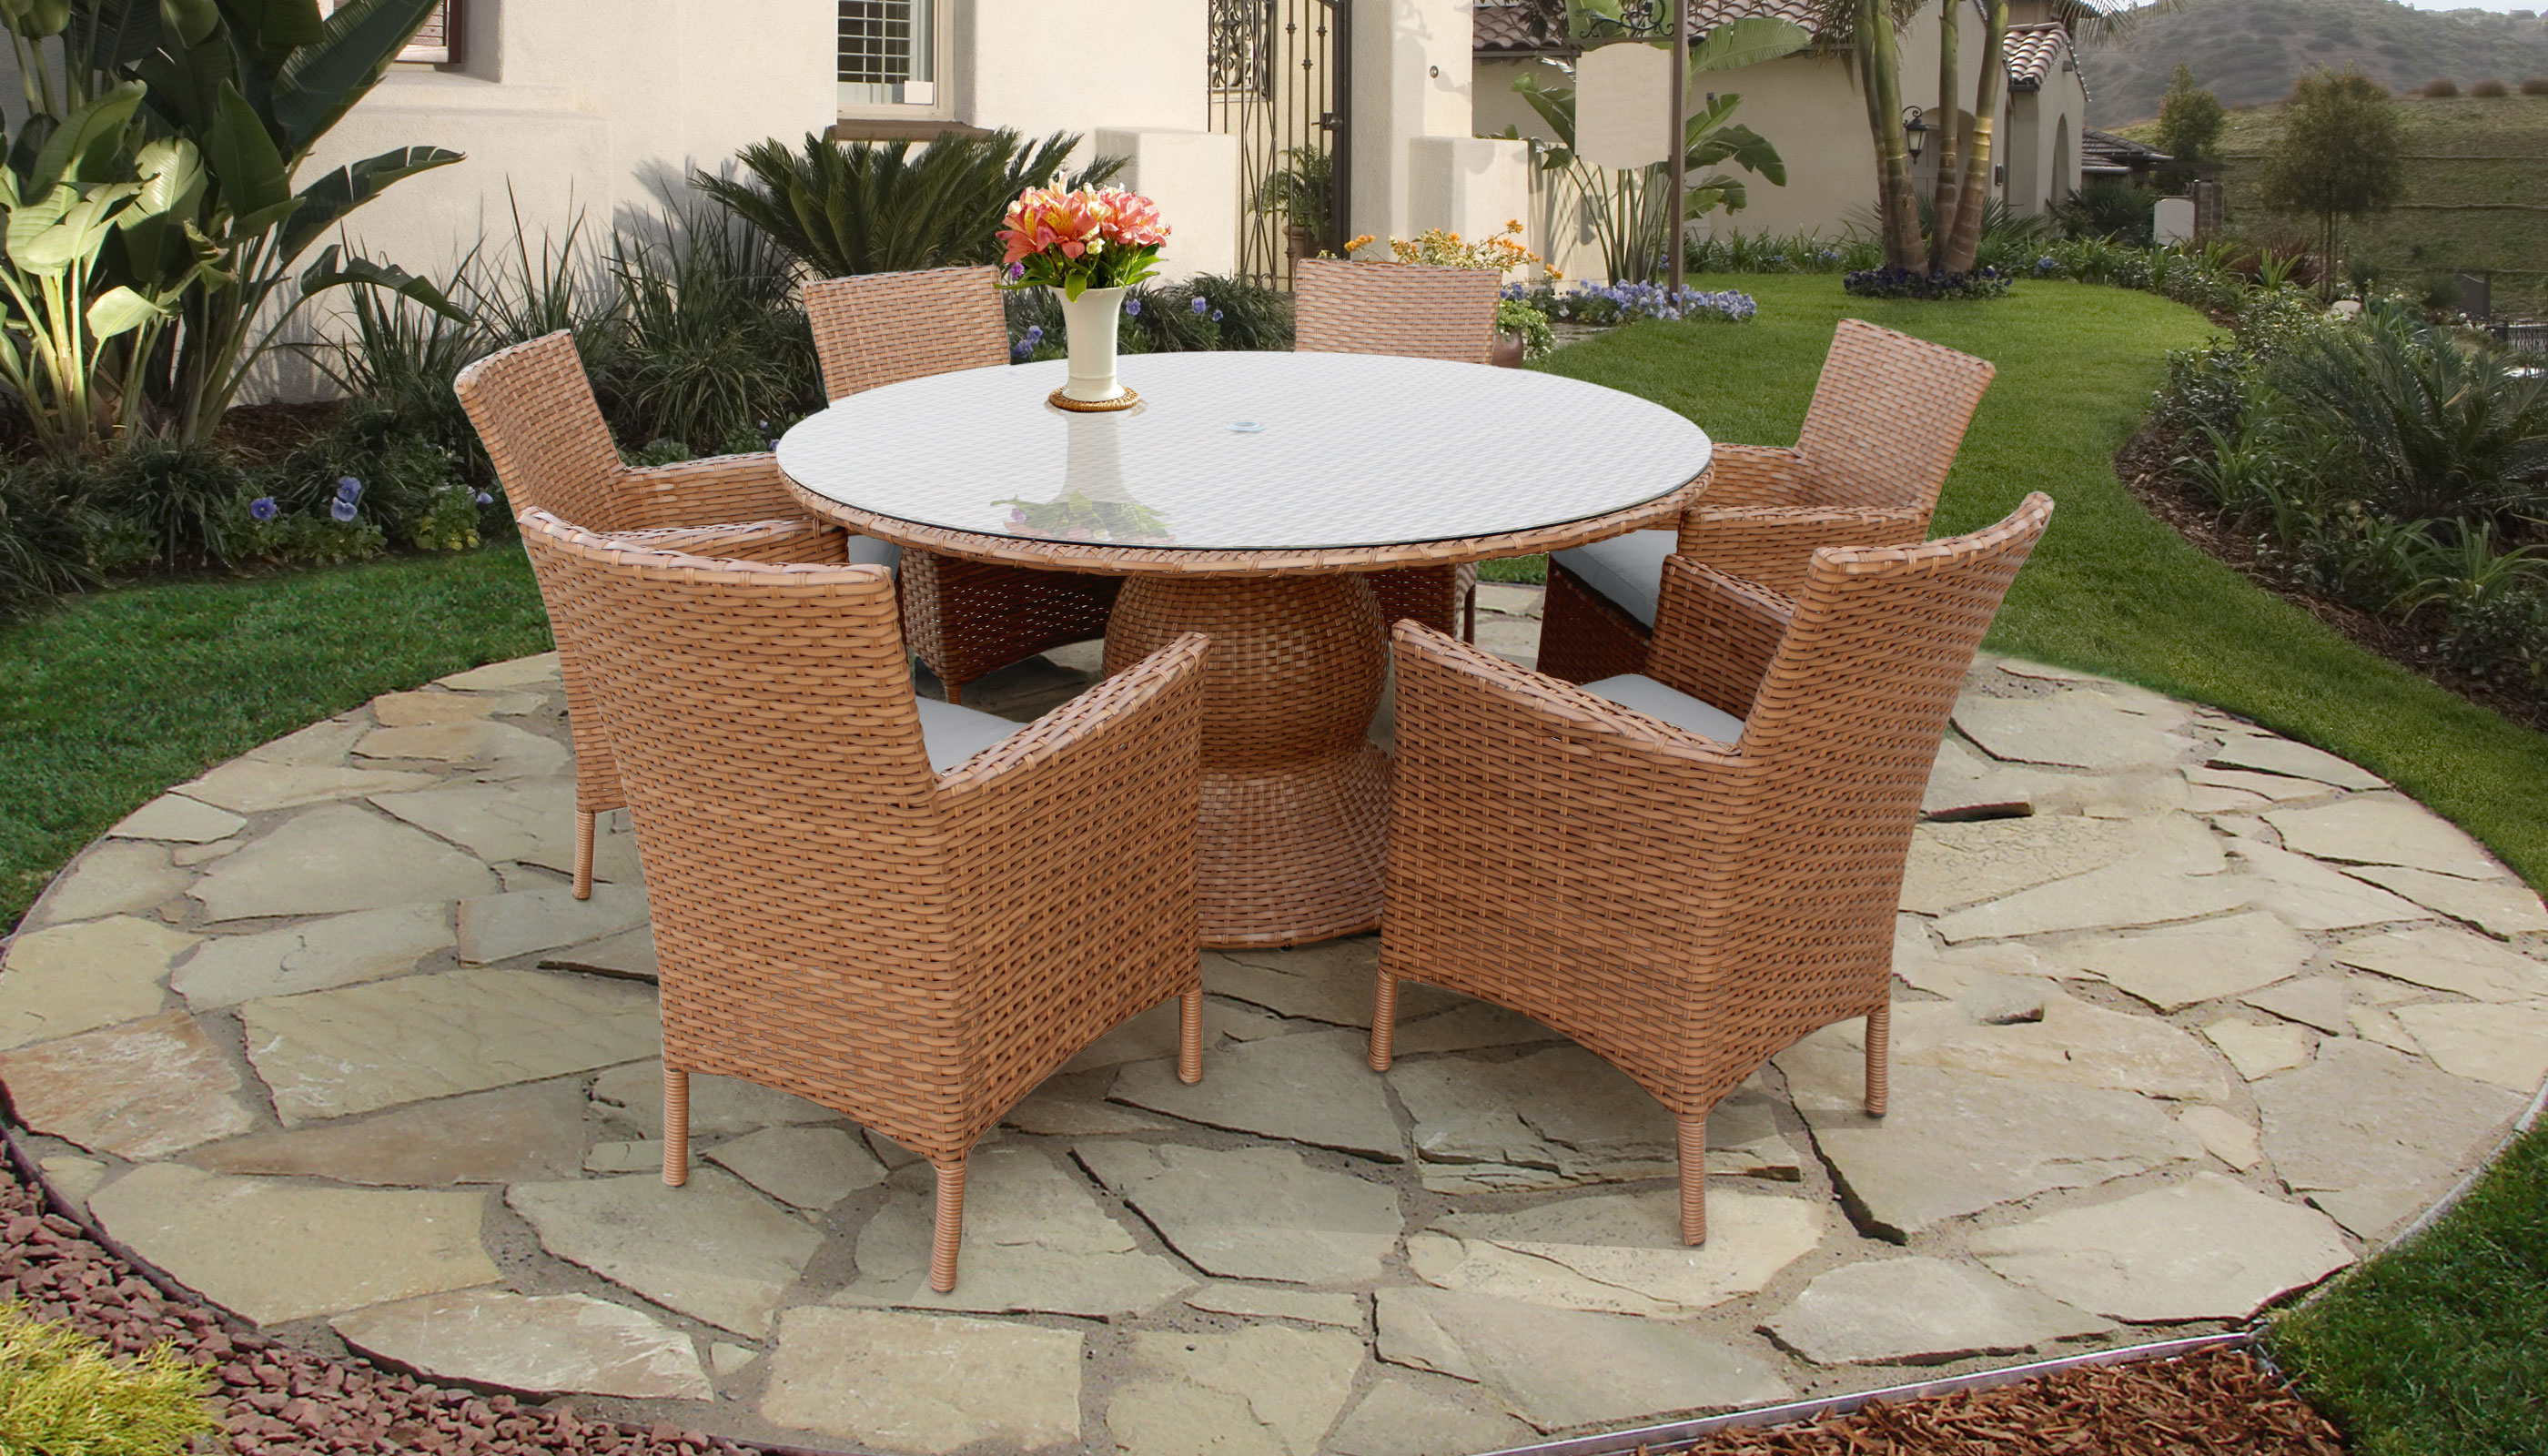 Laguna 60 Inch Outdoor Patio Dining Table with 6 Chairs w/ Arms